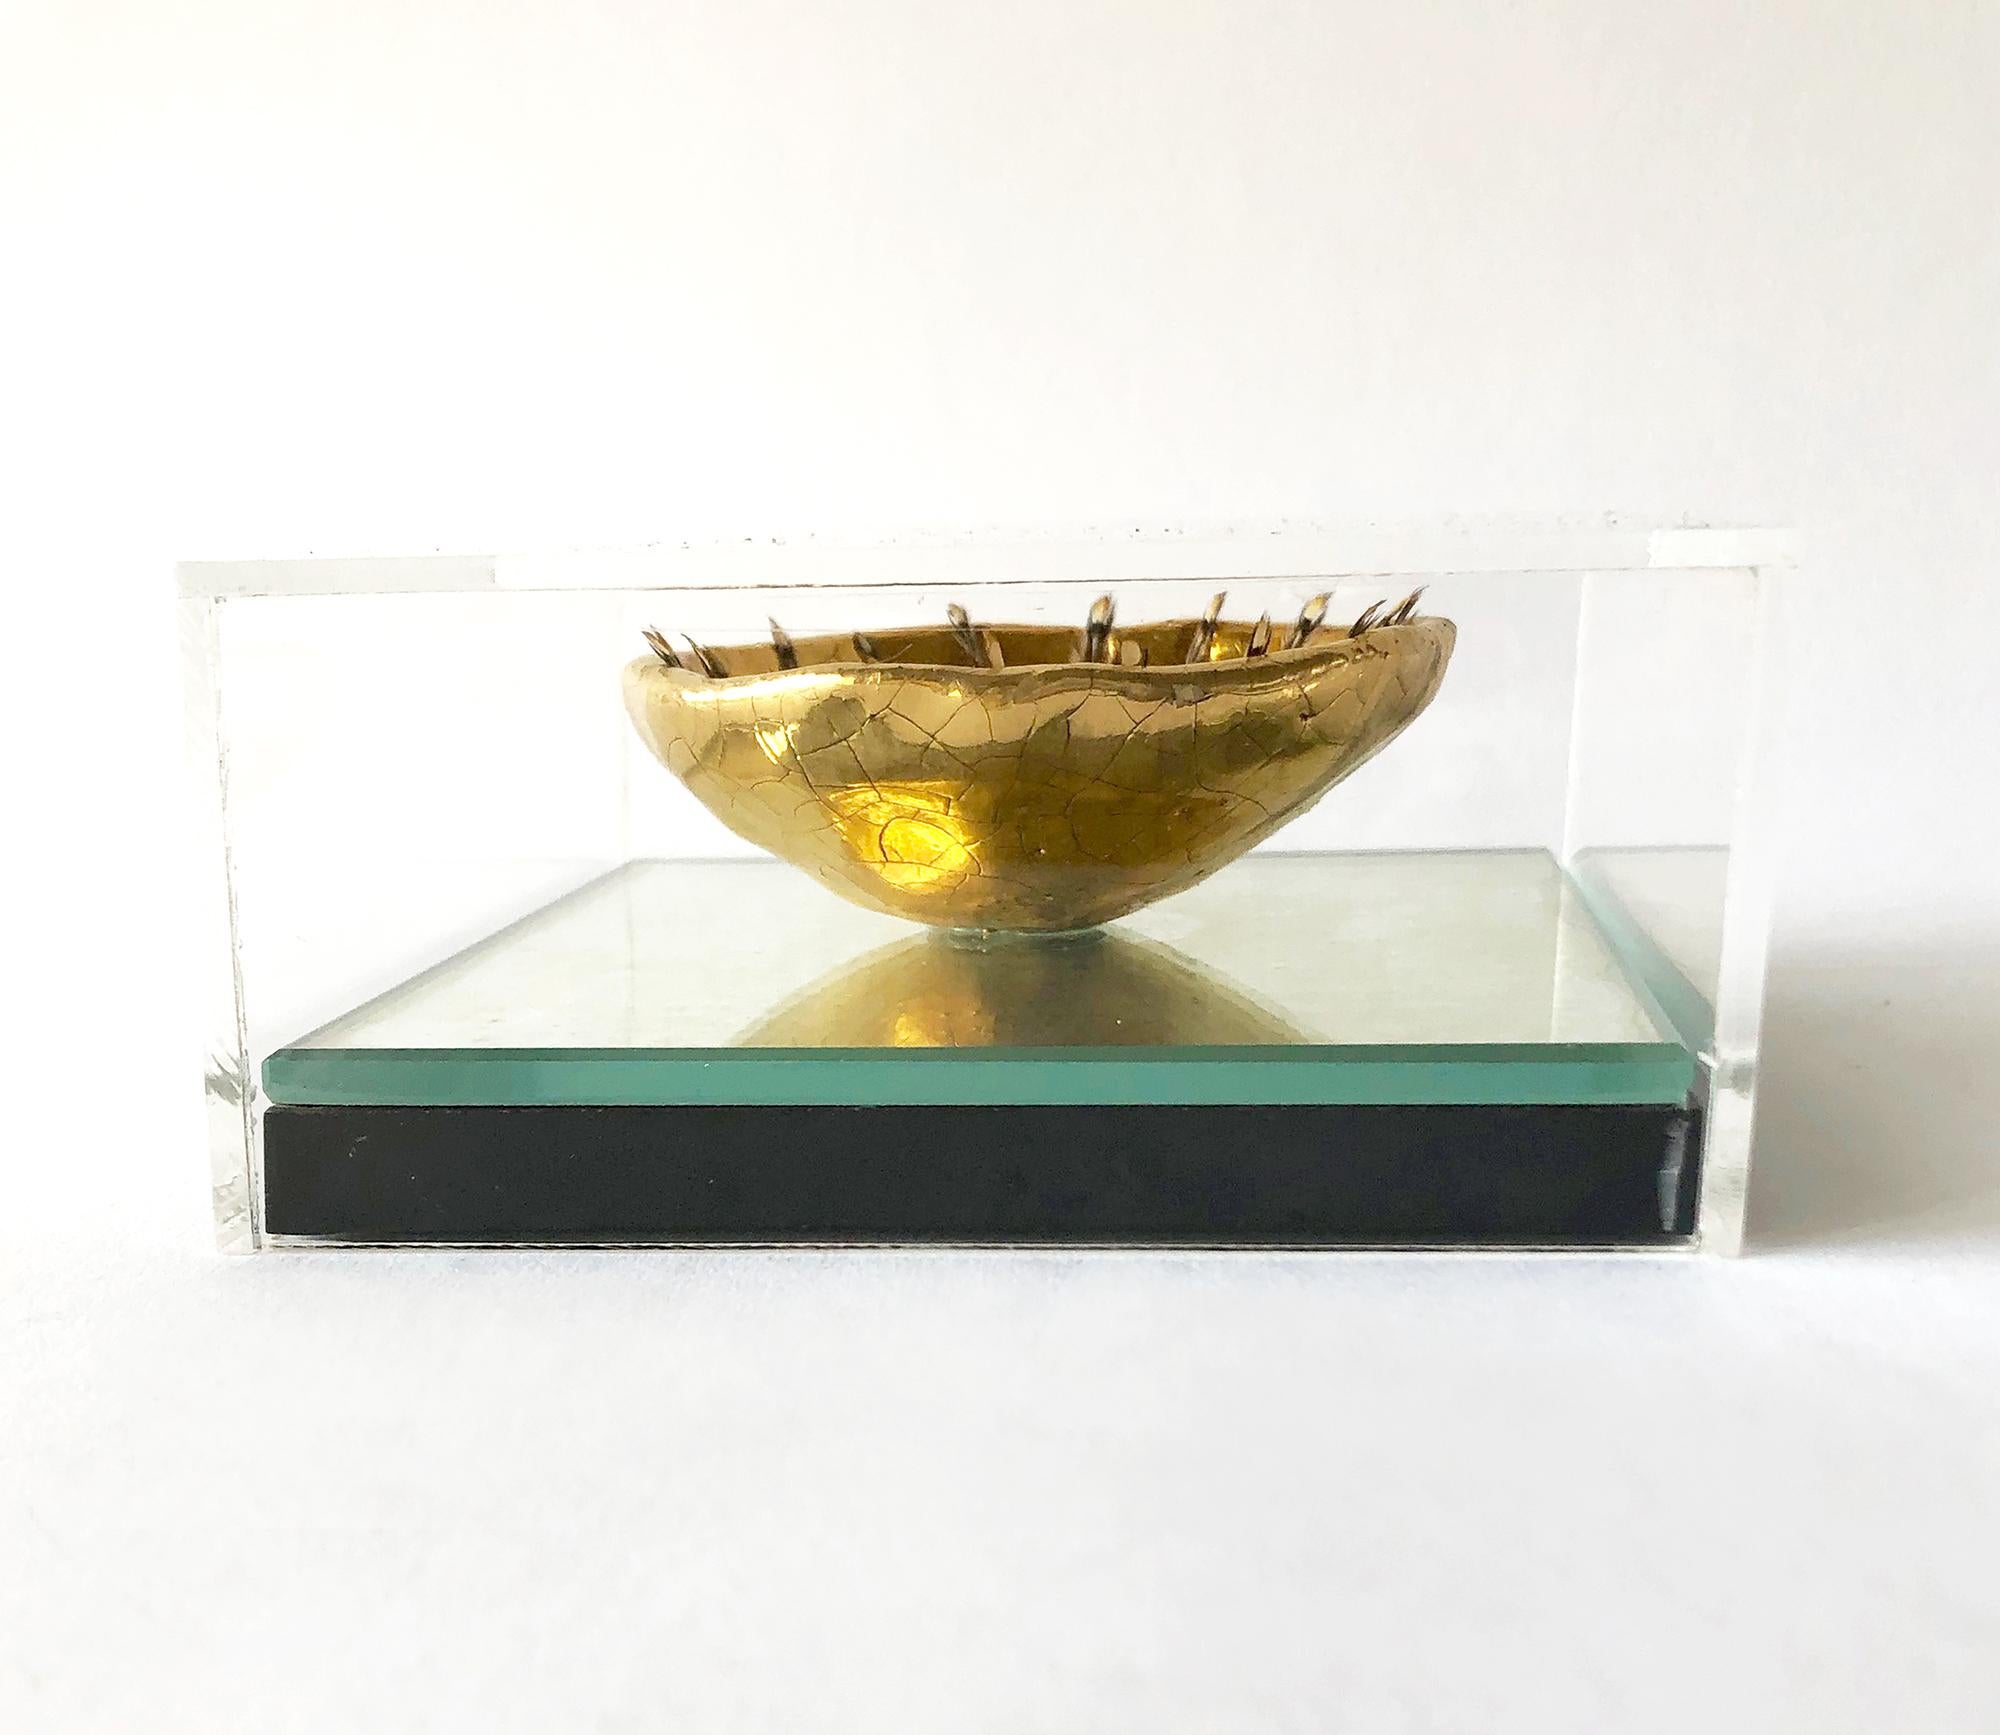 Gold luster funk pottery fetish bowl embellished with applied feathers at its rim created by Ken Shores of Oregon, circa 1960s. Bowl is mounted in an acrylic plexiglass box with mirrored backing measuring 5 1/4